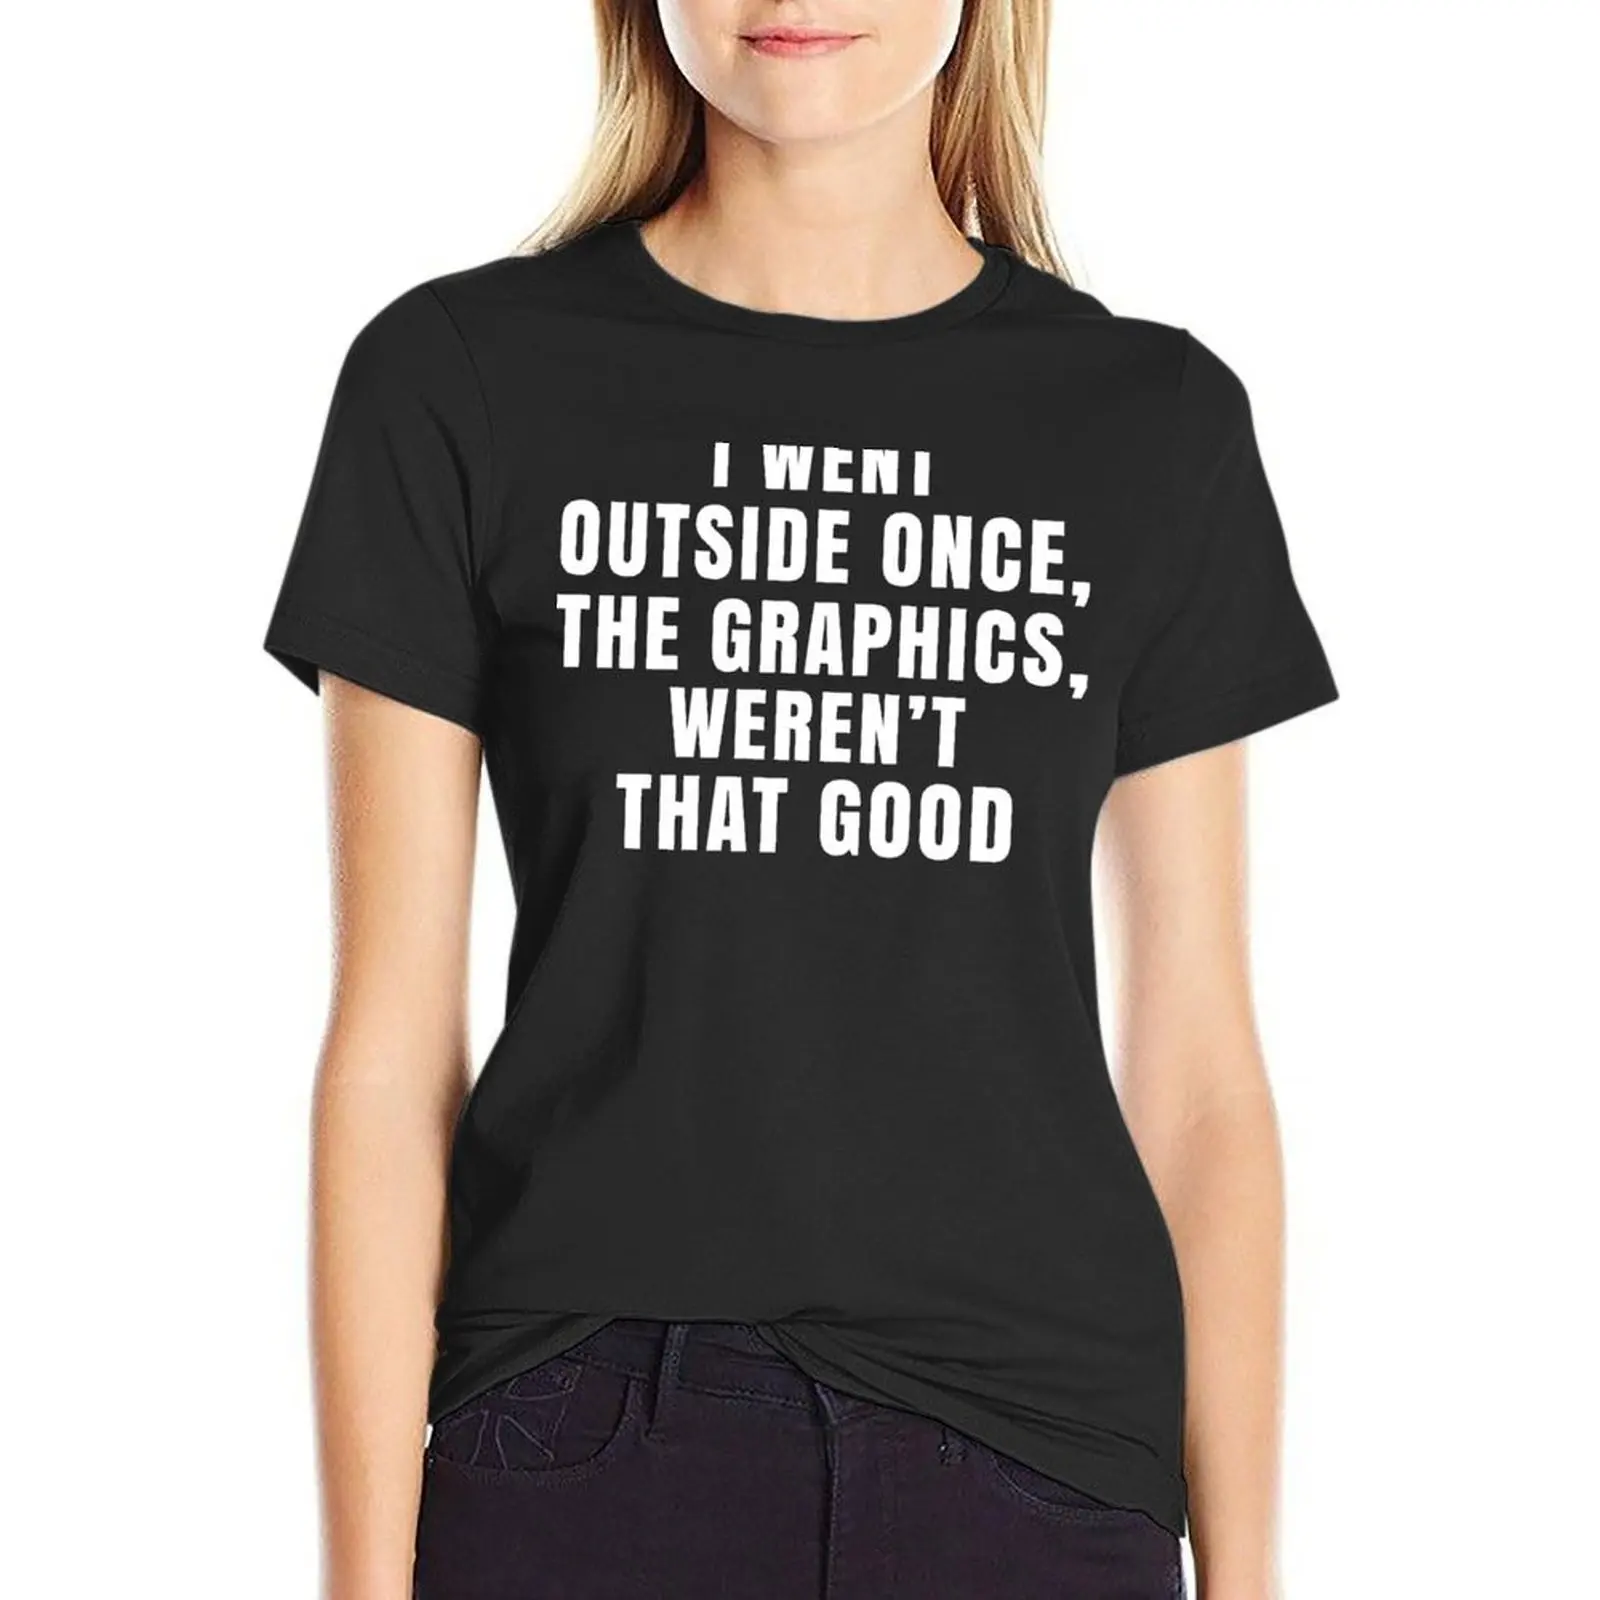 

I Went Outside Once The Graphics Werent That Good T-shirt Blouse lady clothes t shirts for Womens